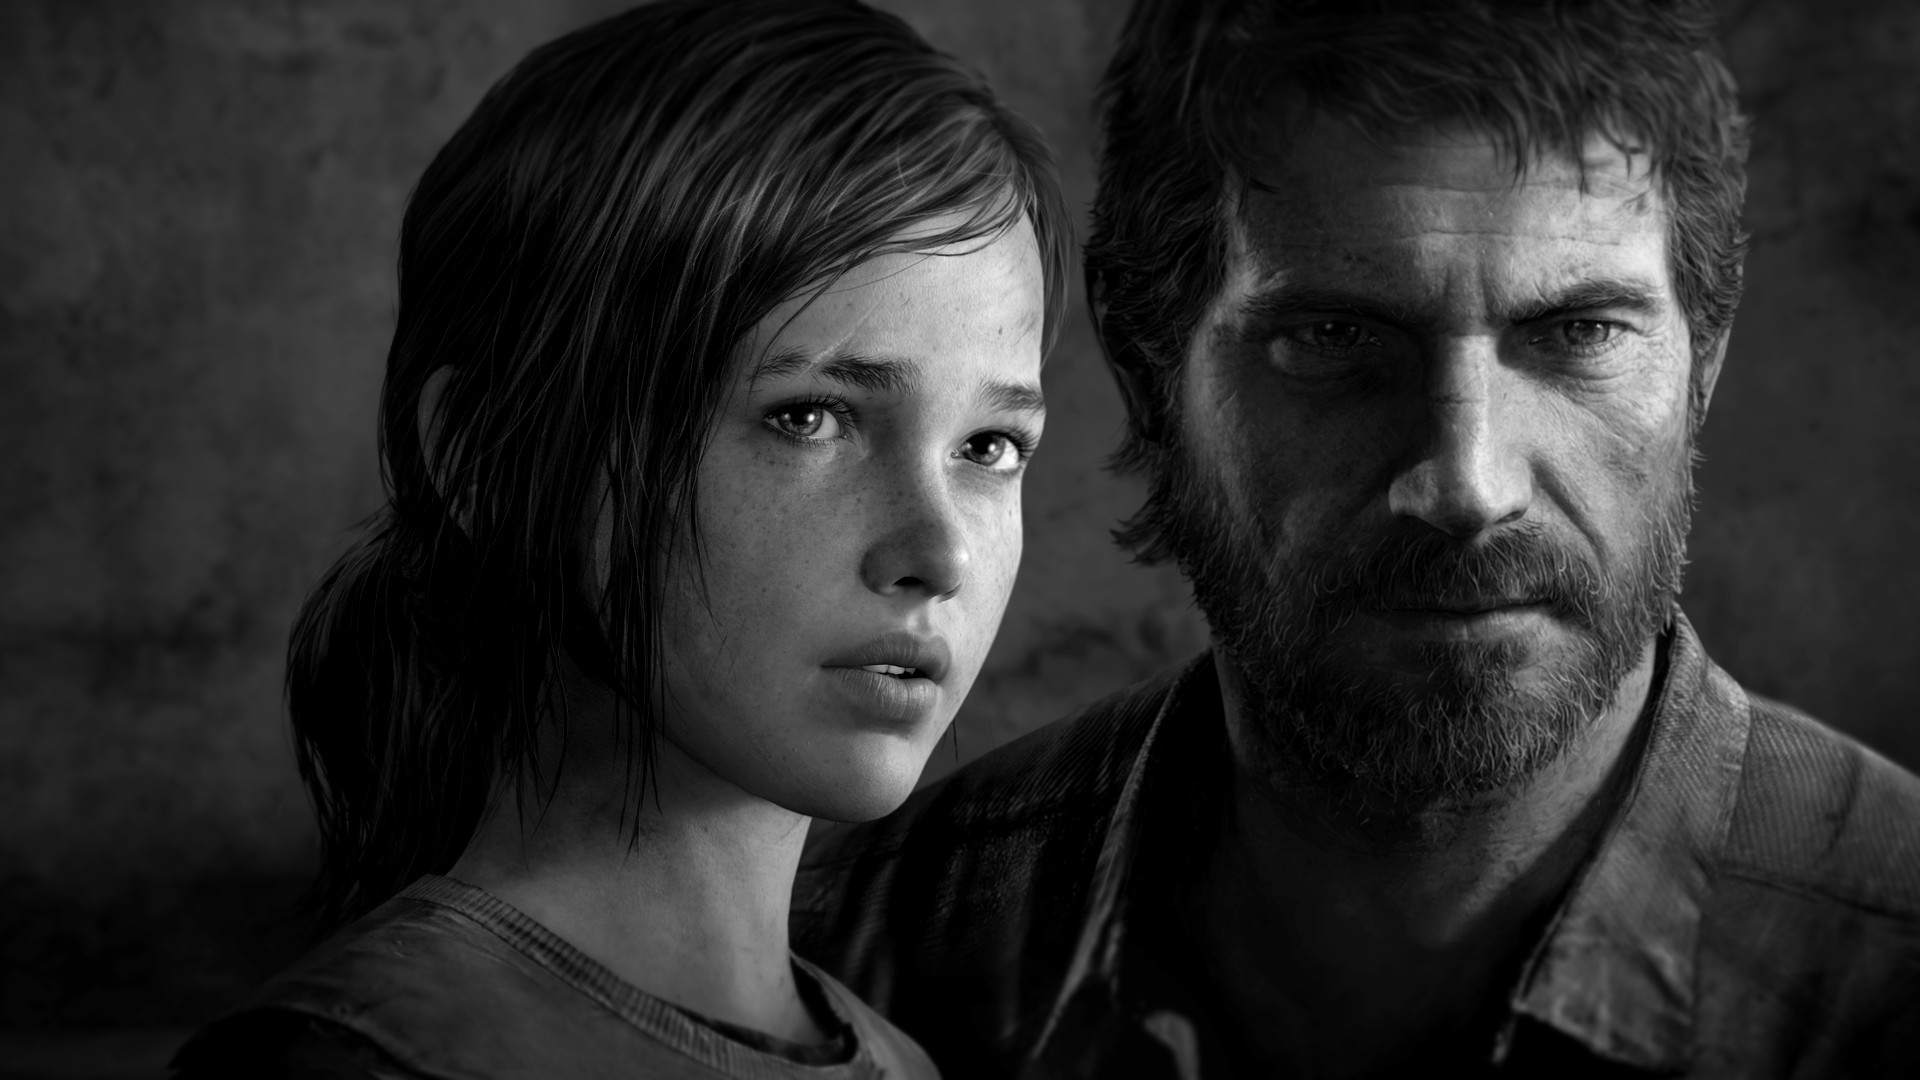 [Rumor] The Last of Us remake for PS5 in the works by Naughty Dog